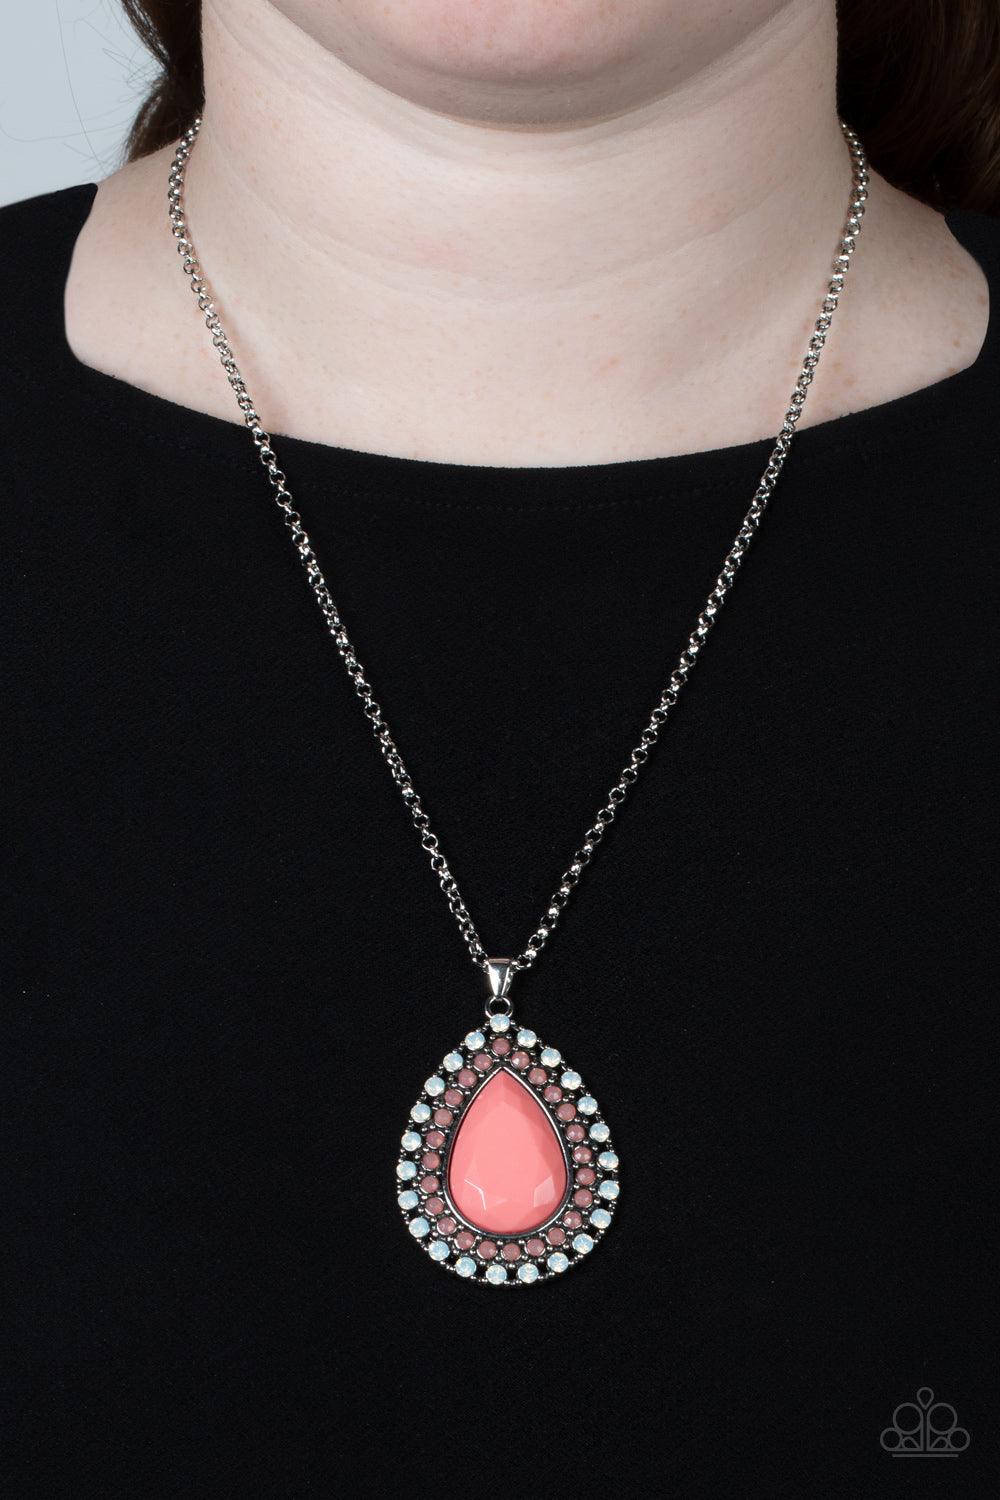 DROPLET Like Its Hot Multi Necklace - Jewelry by Bretta